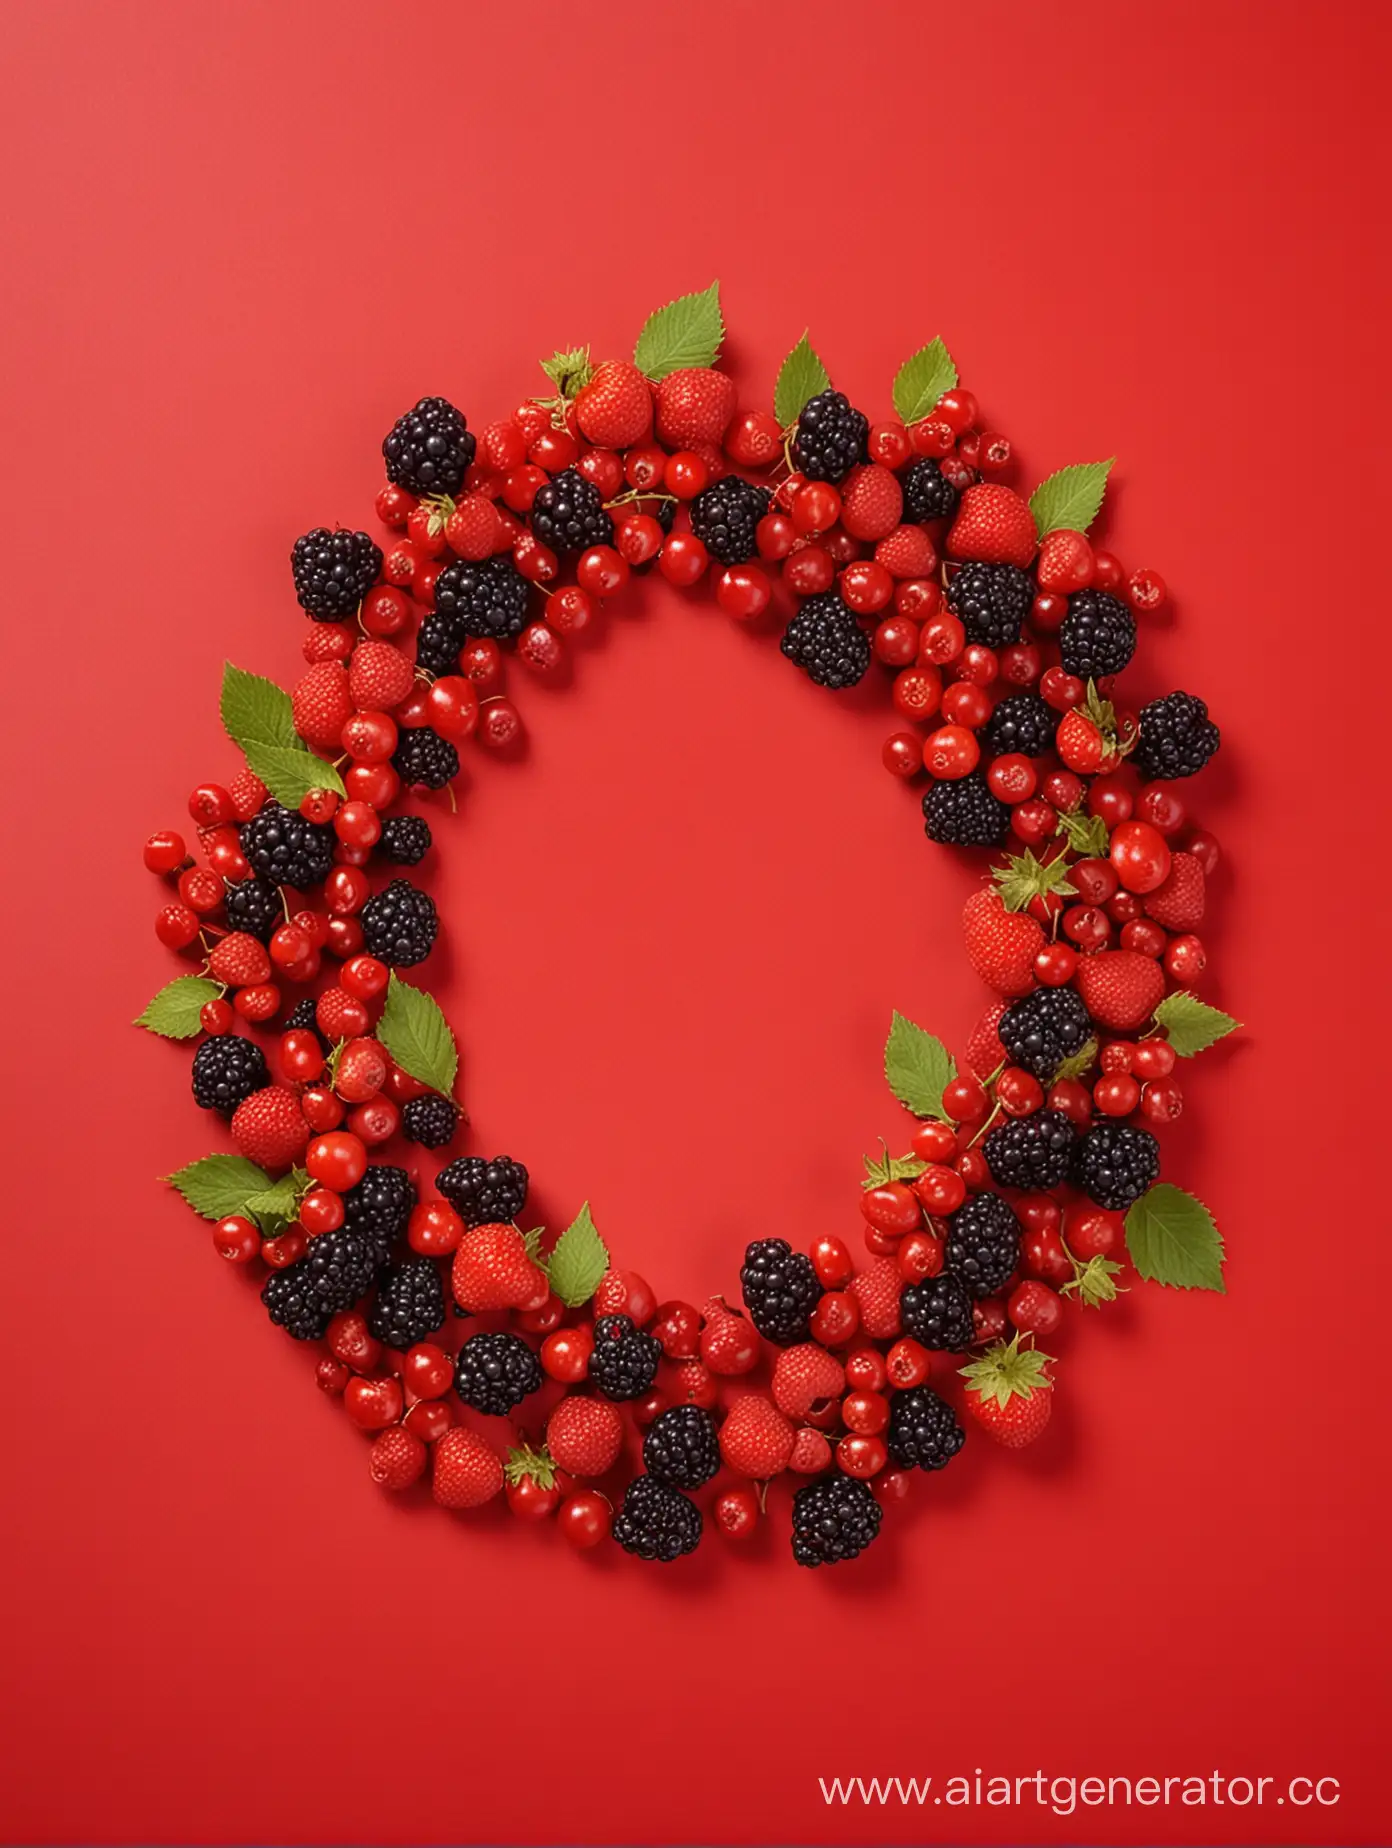 The berries lie around in a circle shape. On a scarlet background